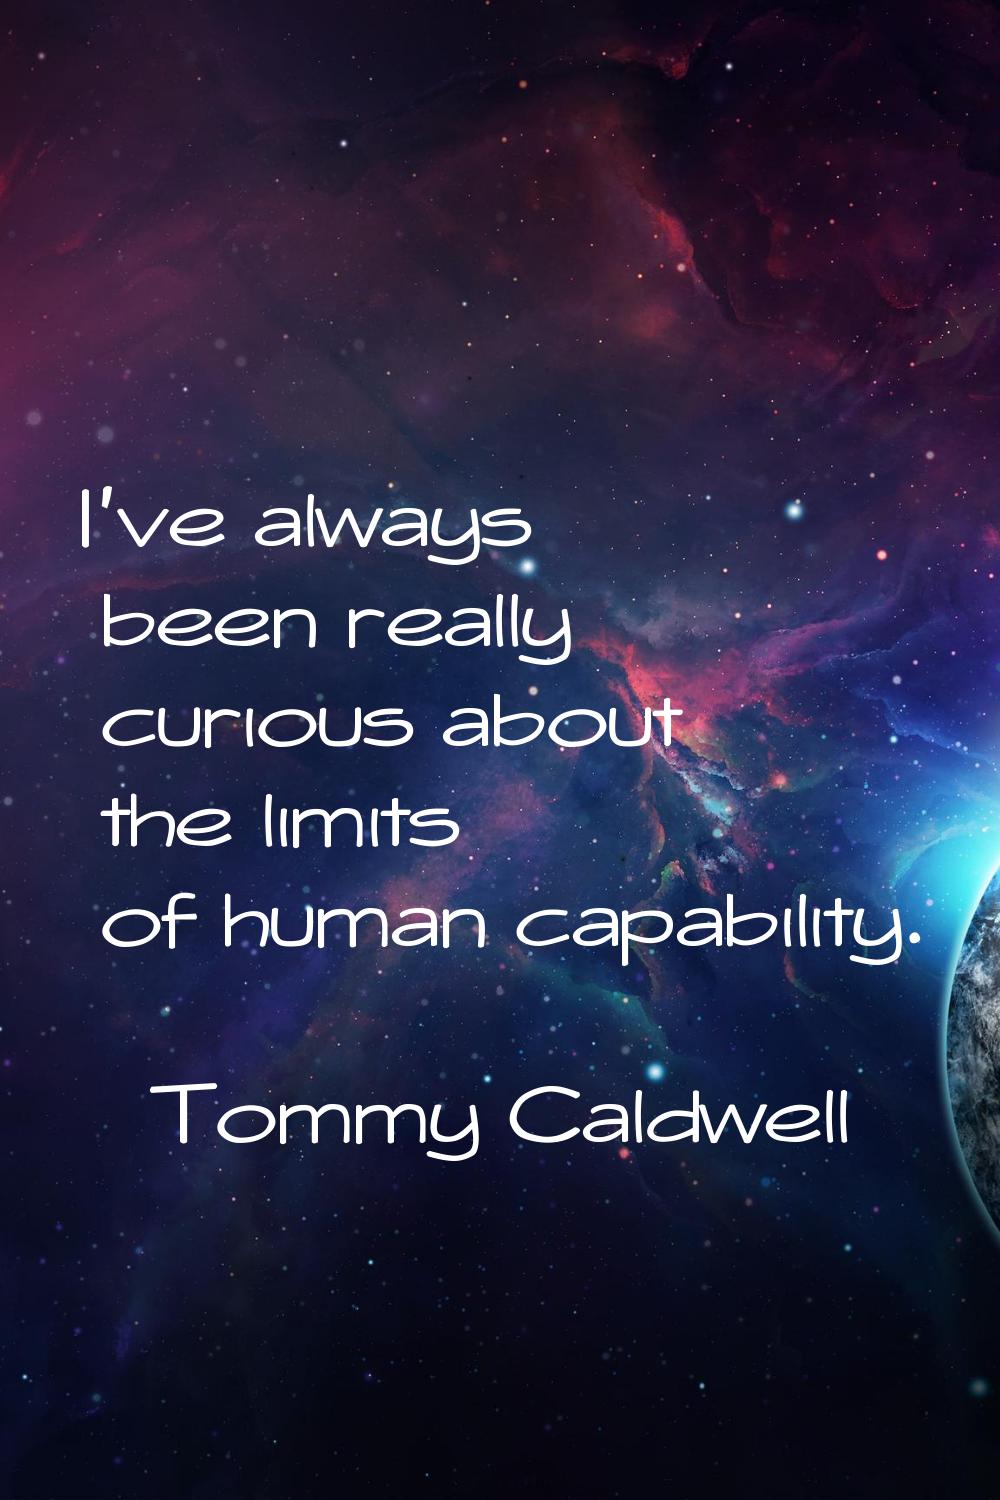 I've always been really curious about the limits of human capability.